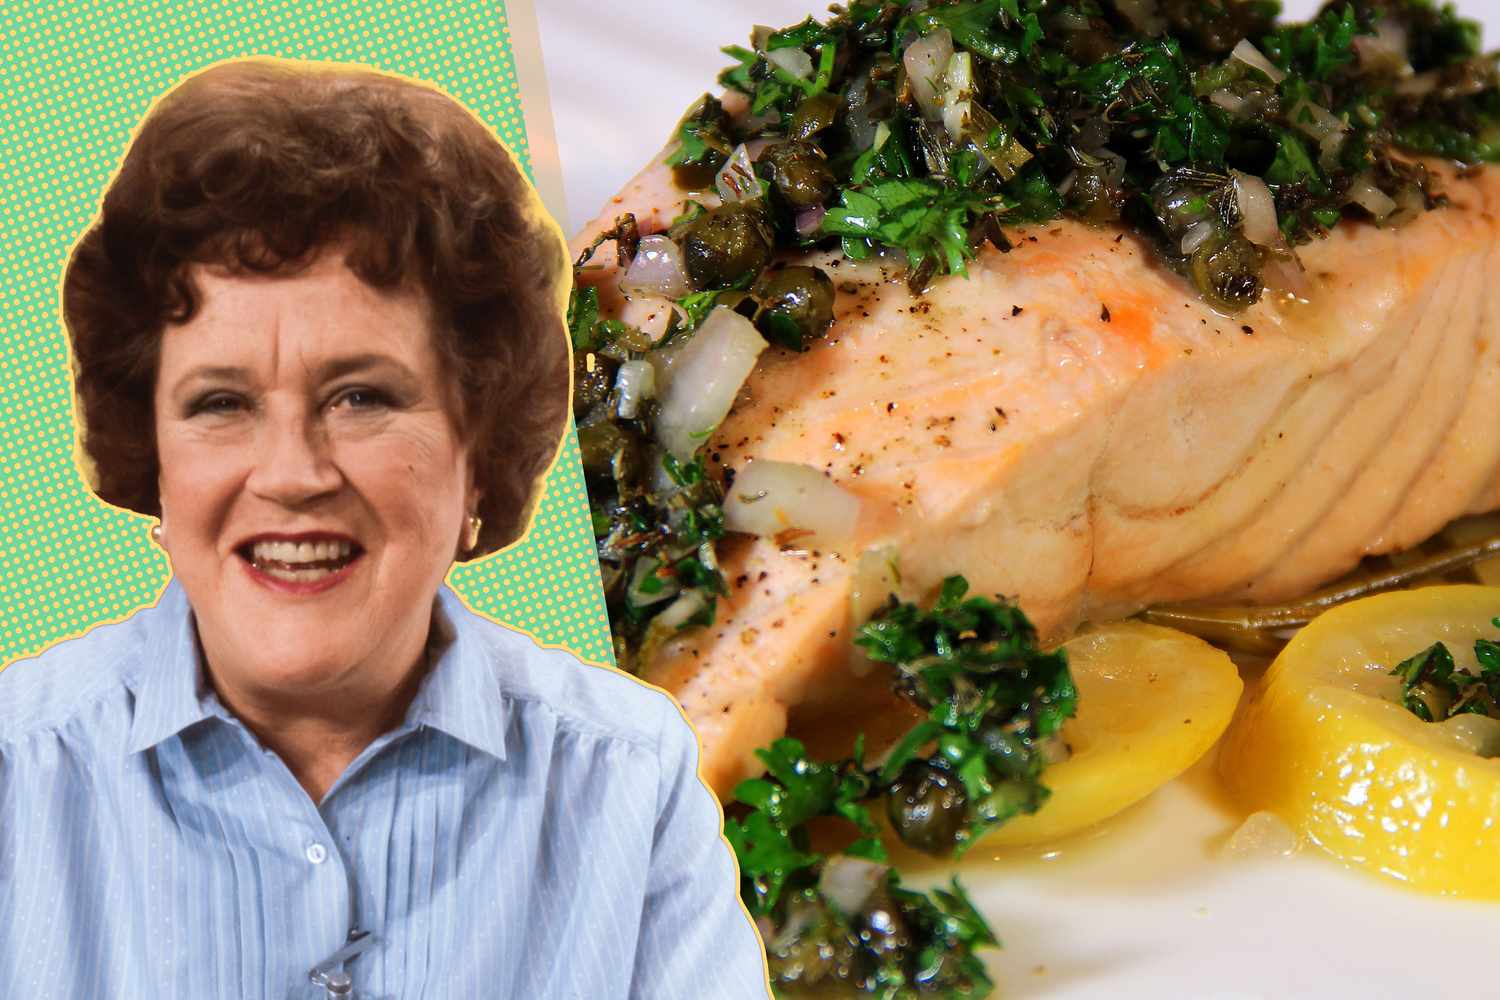 The Julia Child Salmon Recipe I’ve Been Making for 25 Years (It's Foolproof)